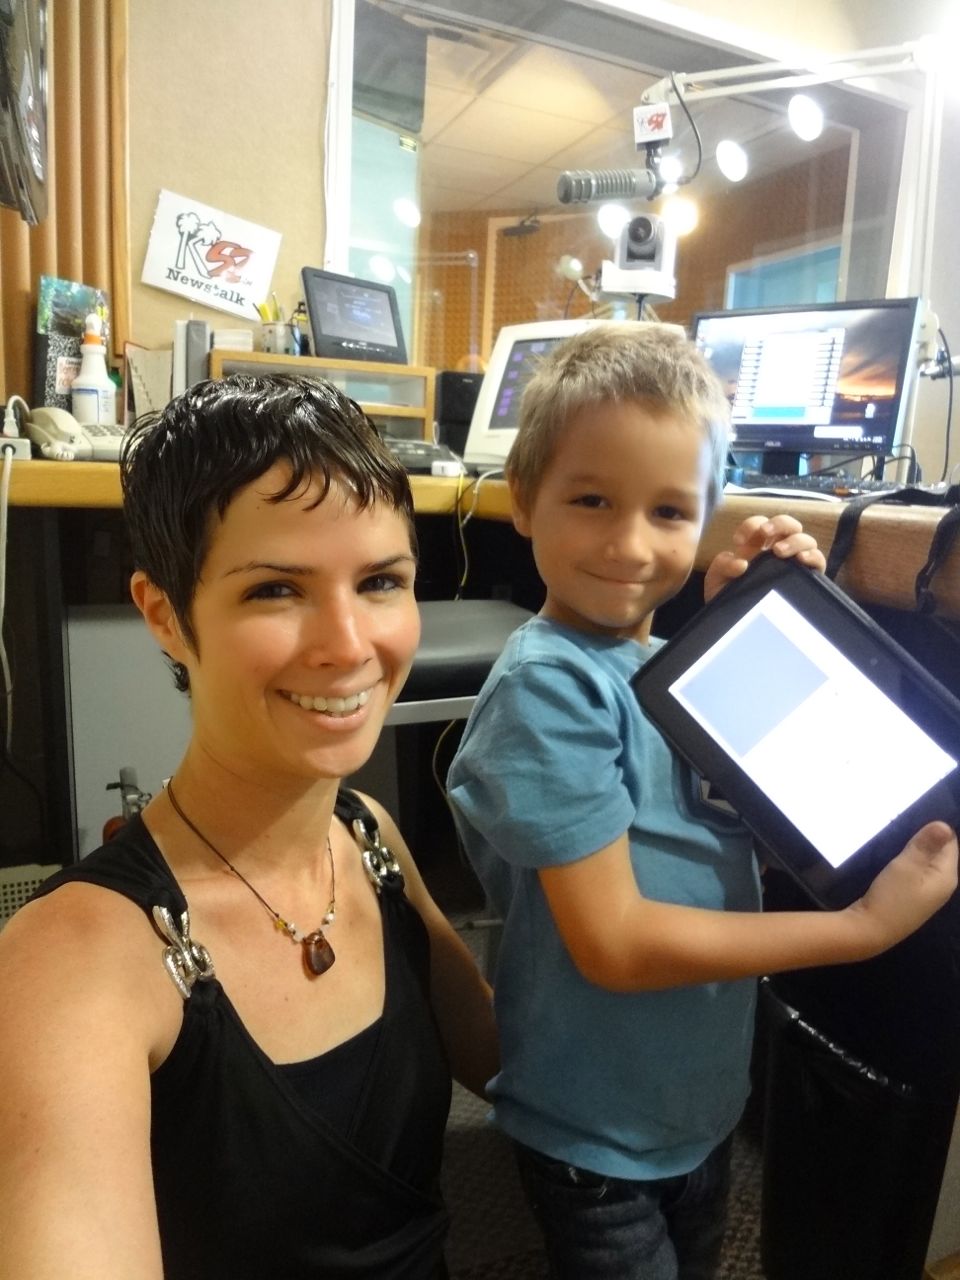 A Spontaneous Date Day With My Son: Radio Show, Library & Playport